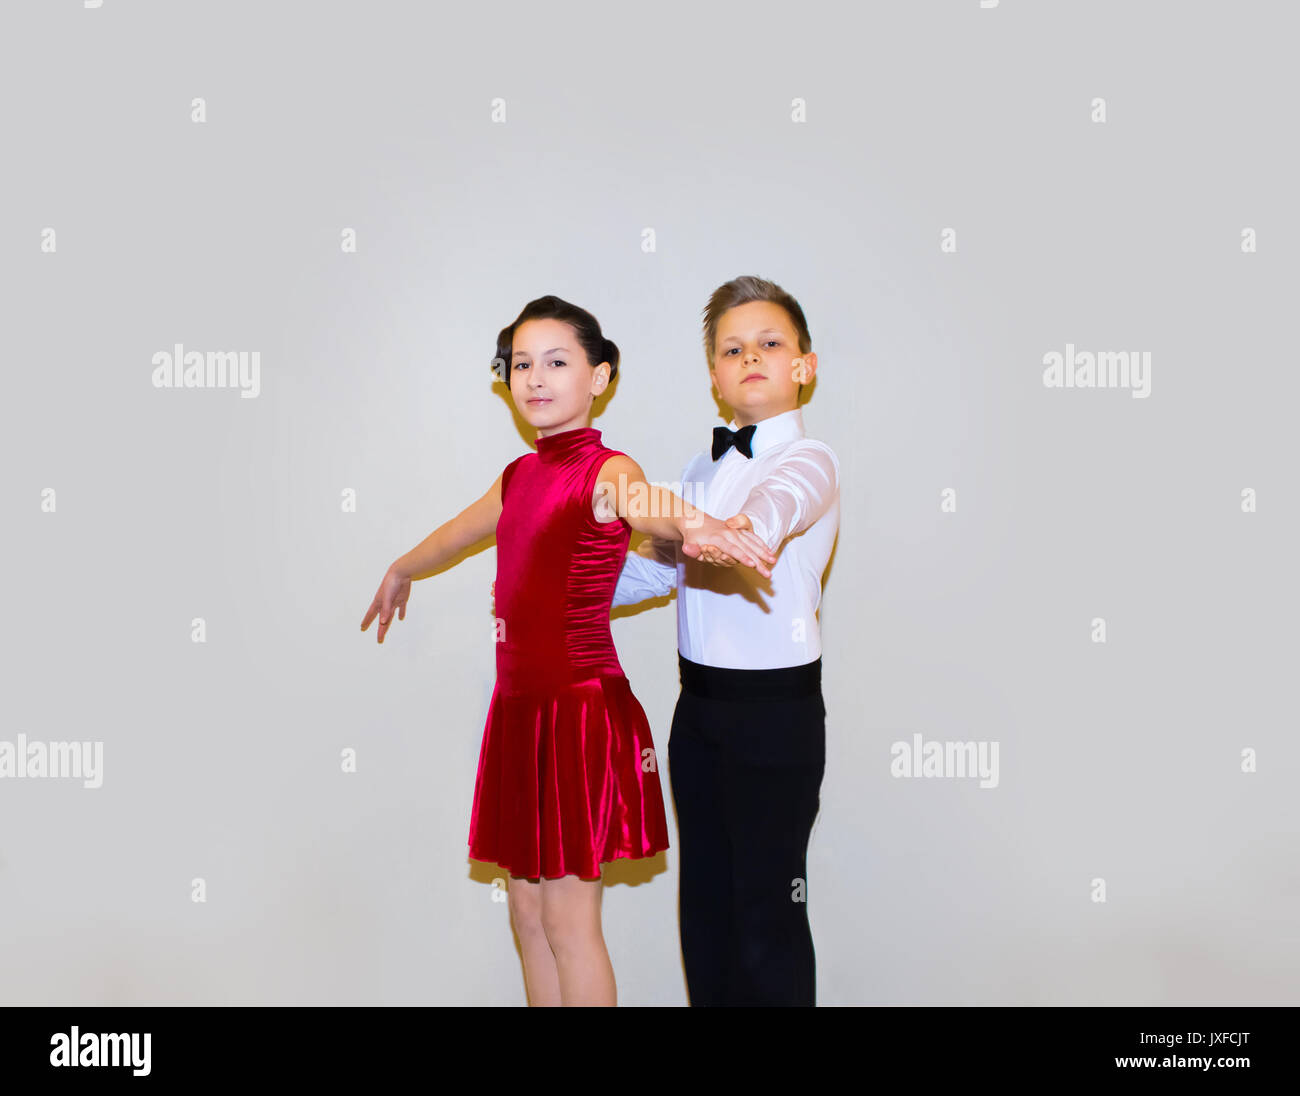 The young boy and girl posing at dance studio Stock Photo